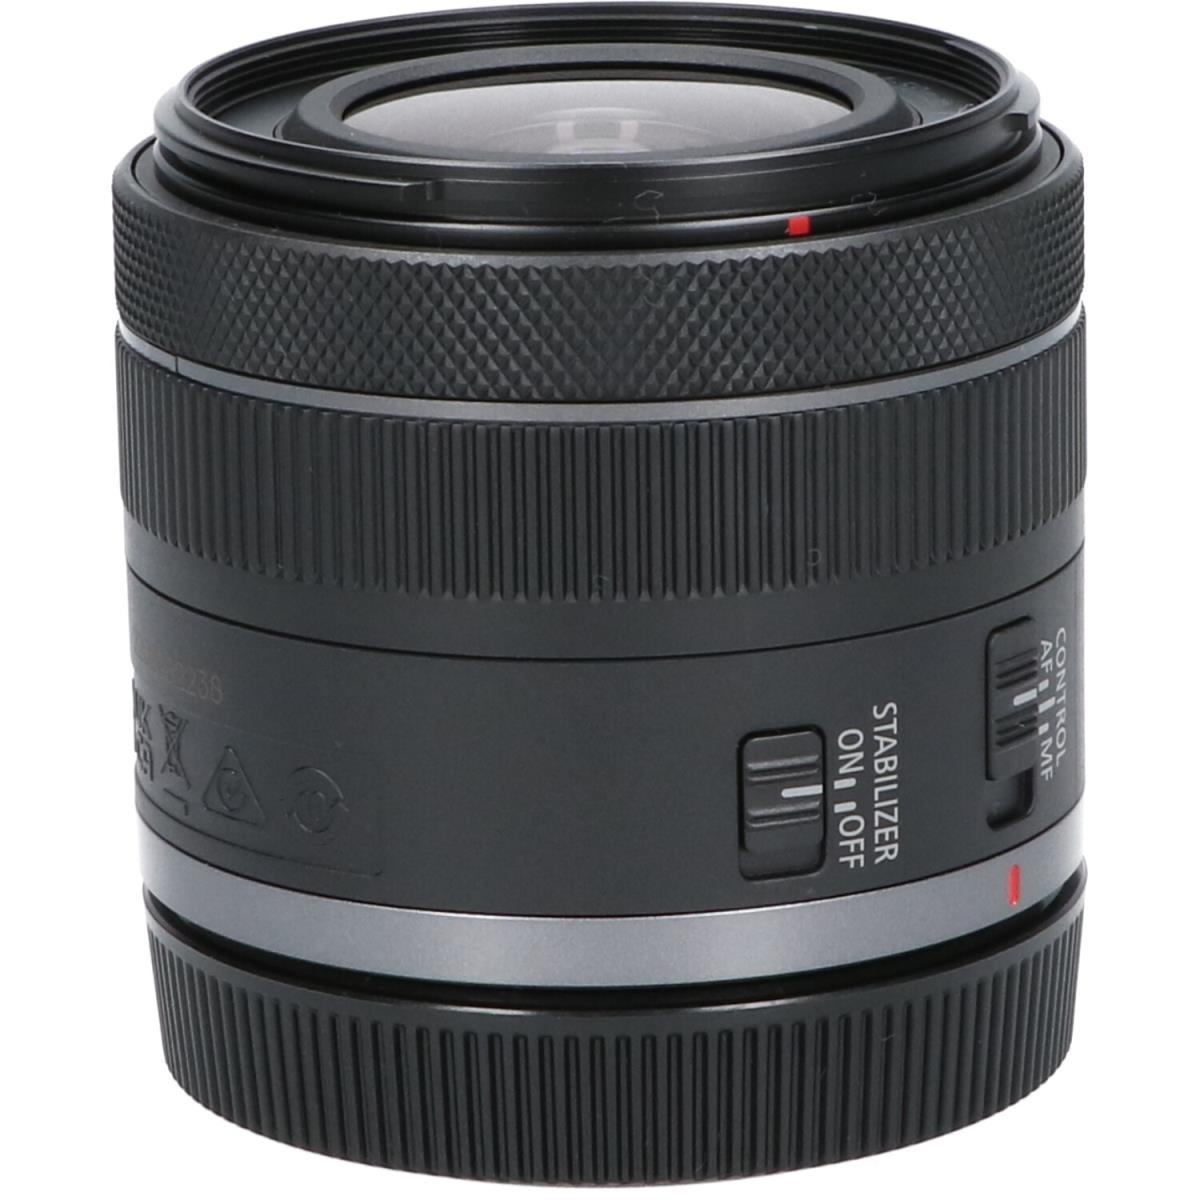 RF24-50mm F4.5-6.3 IS STM